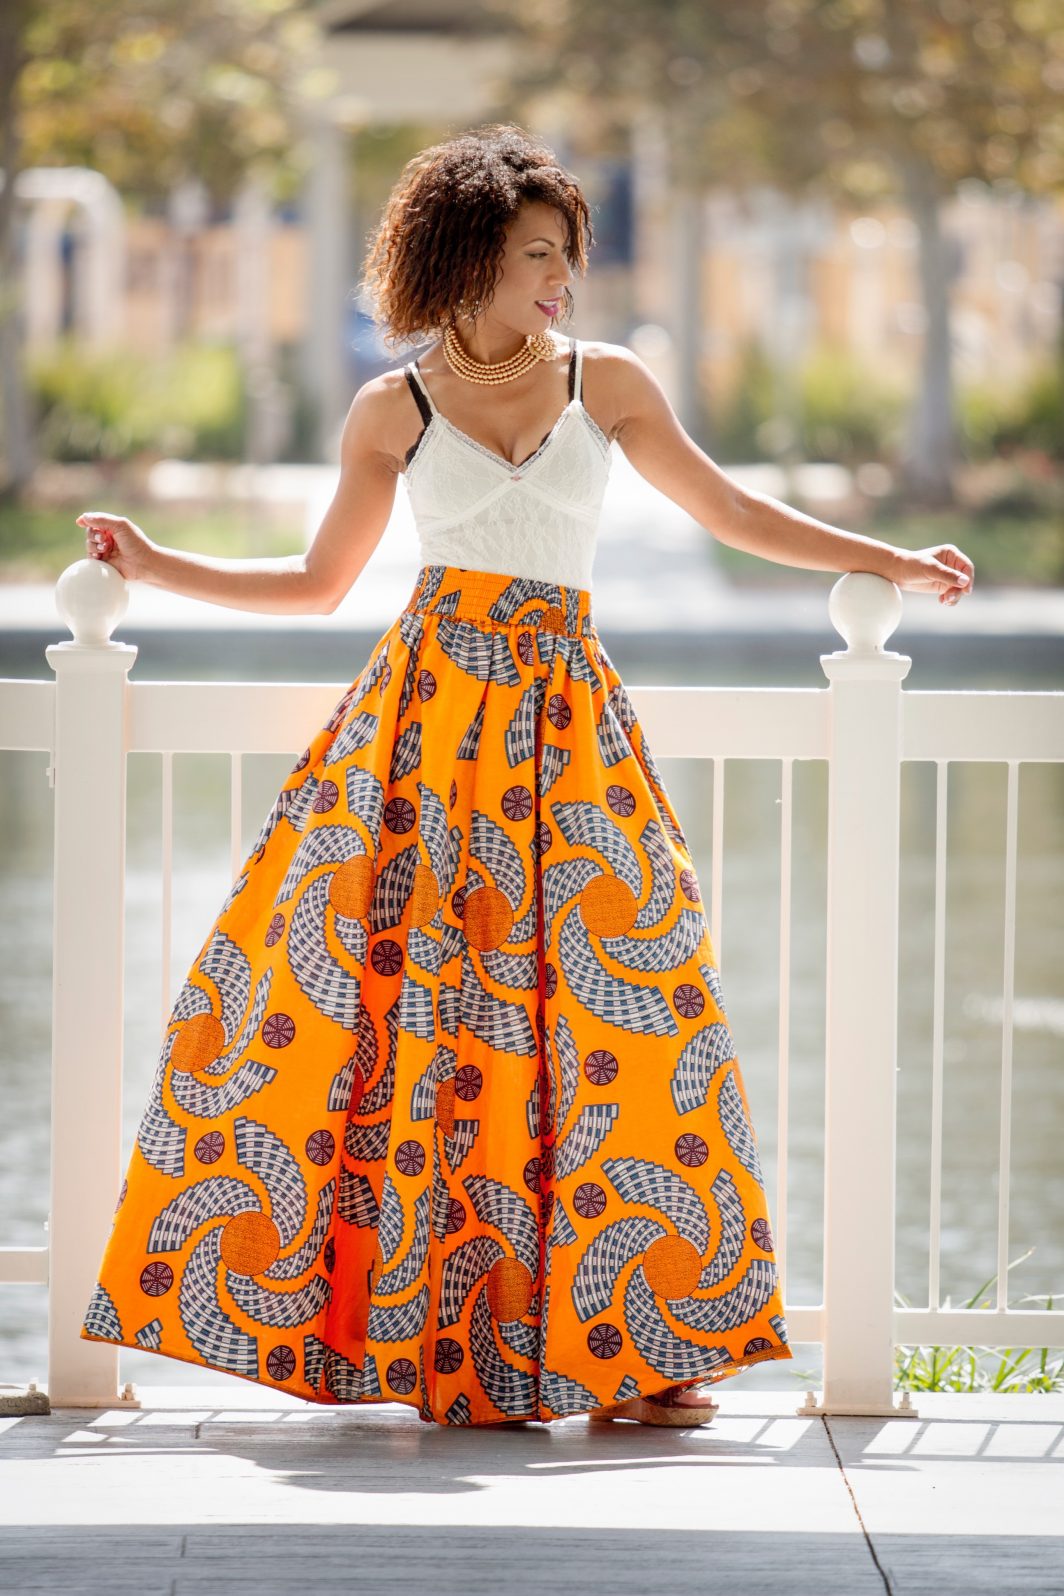 Pictures Of African Skirts anal free